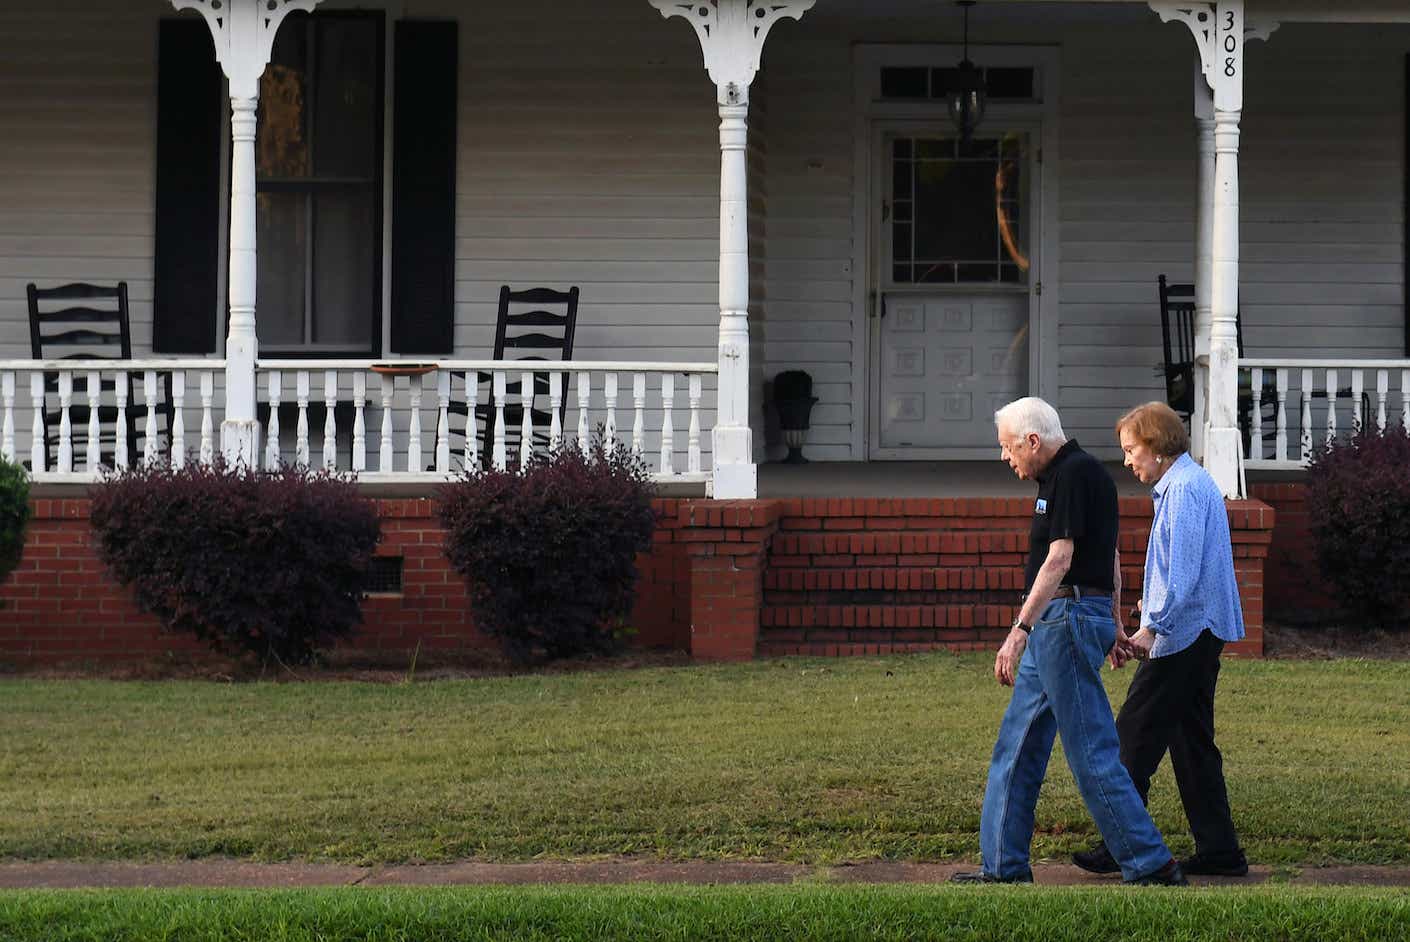 former President of the United States, Jimmy Carter walks with his wife, former First Lady, Rosalynn Carter towards their home following dinner at a friend's home on Saturday August 04, 2018 in Plains, GA